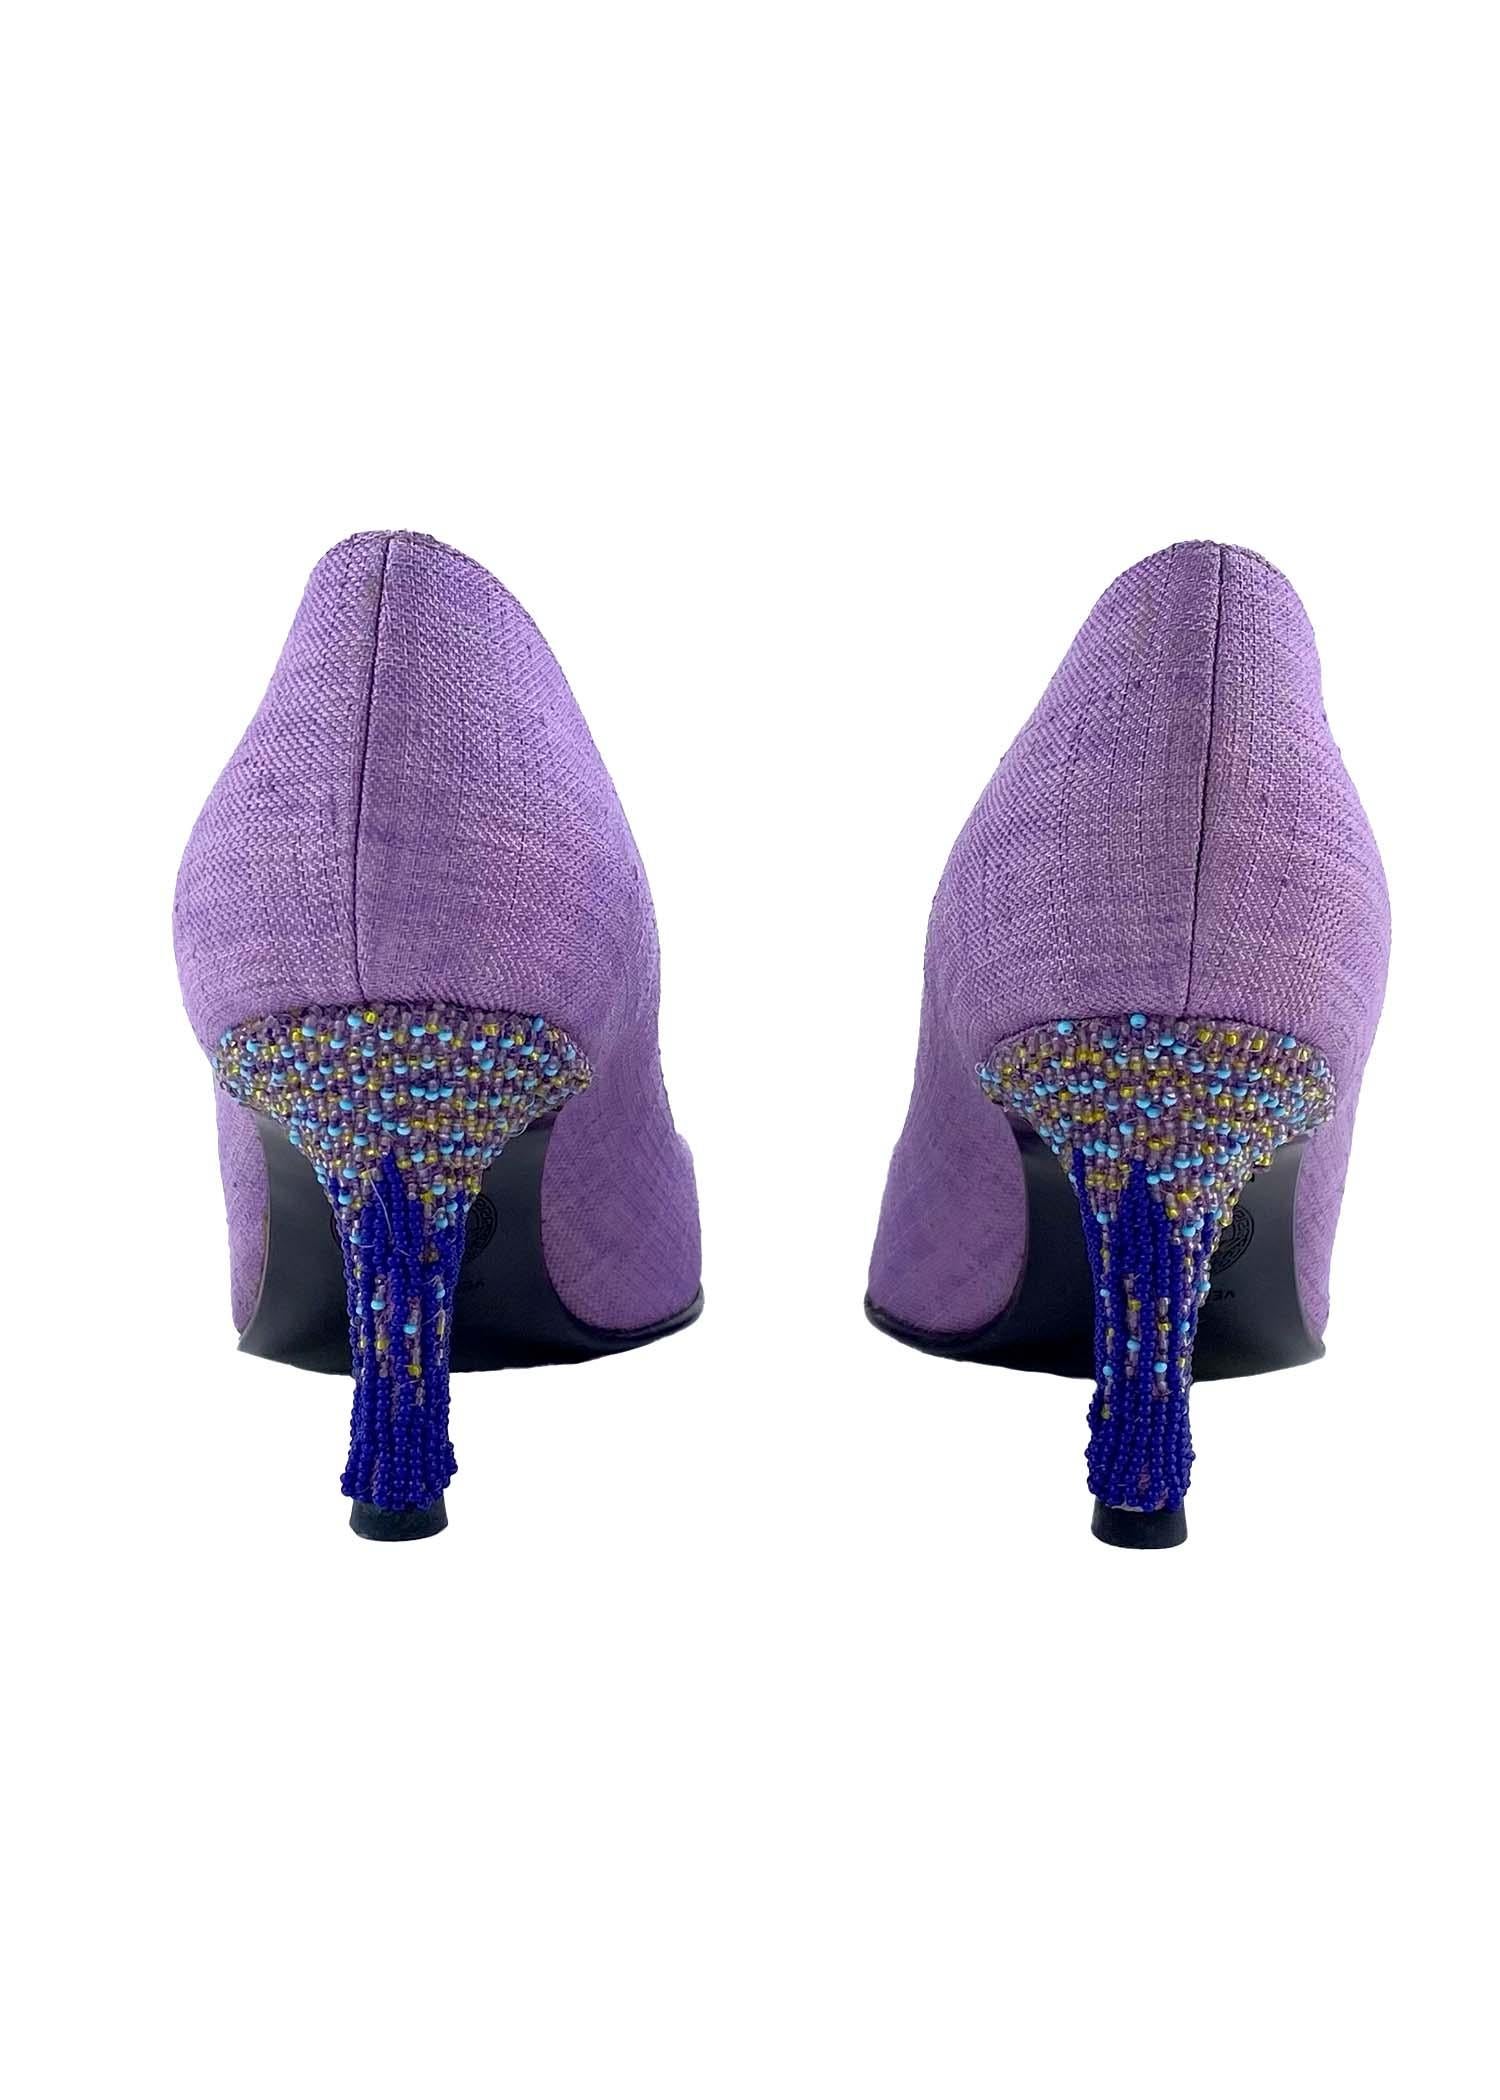 Presenting a beaded heel purple linen Versace pump, designed by Donatella Versace. This pair of heels are constructed primarily of lilac linen and feature a heavily beaded heel. Simply magnificent, these shoes are masterfully constructed and